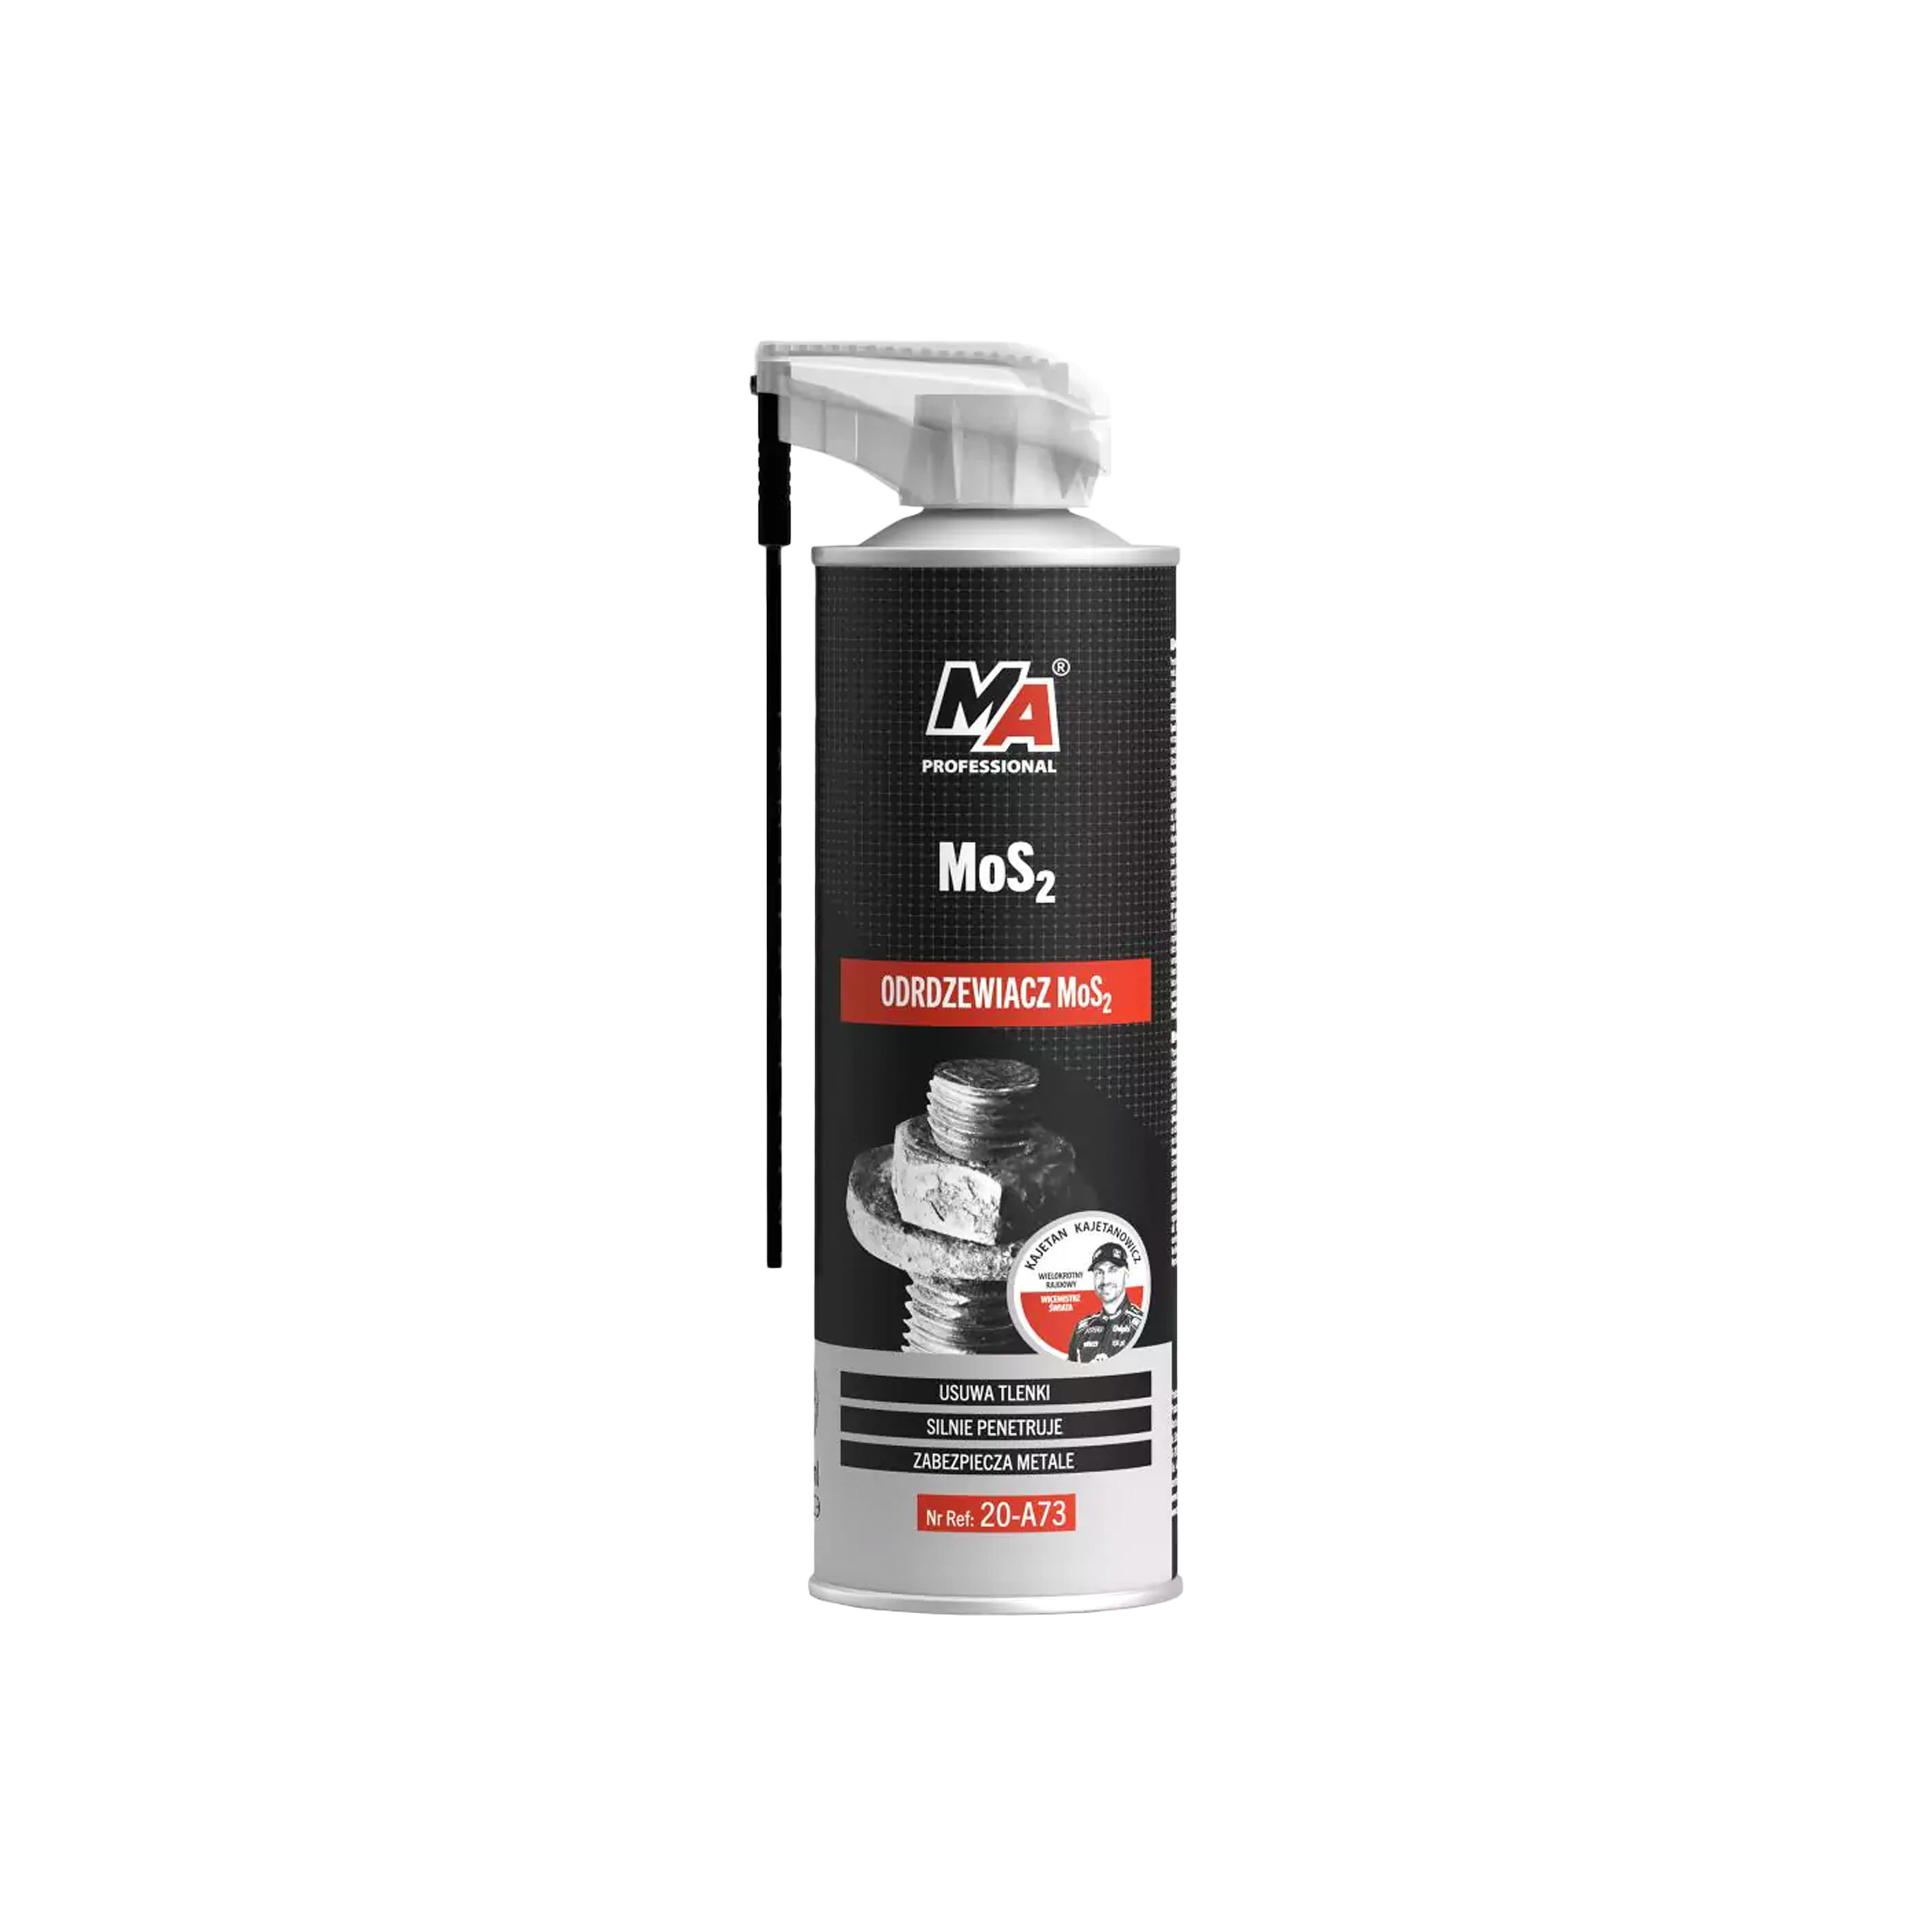 MoS2 Rust Remover with Applicator